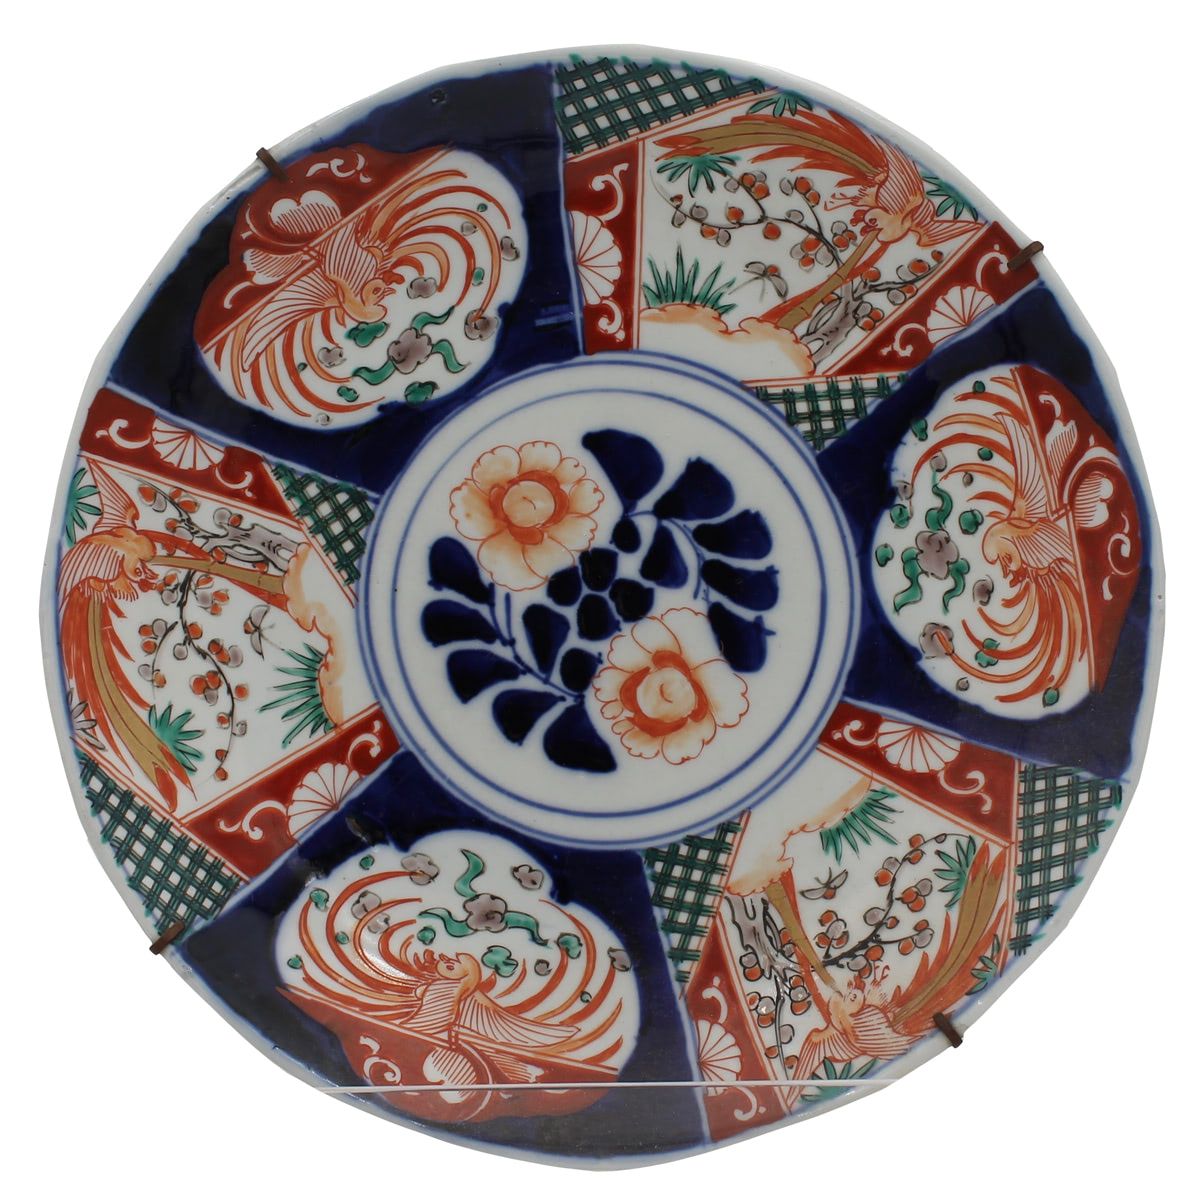 PIATTO DA MURO - WALL PLATE Polychrome porcelain decorated with floral and ornam&hellip;